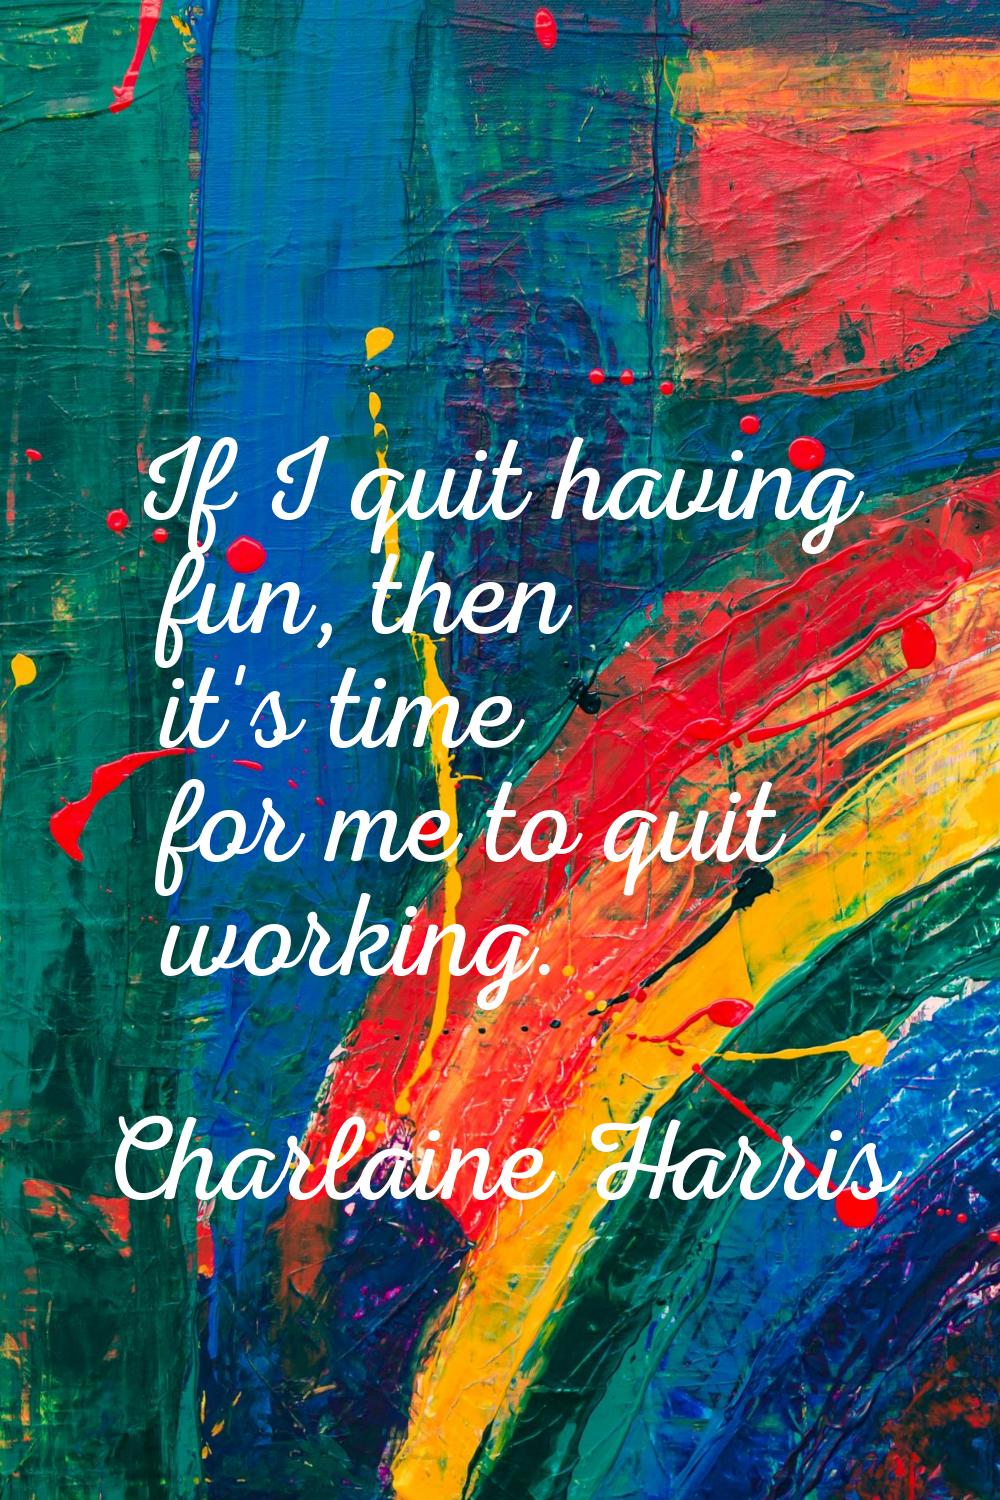 If I quit having fun, then it's time for me to quit working.